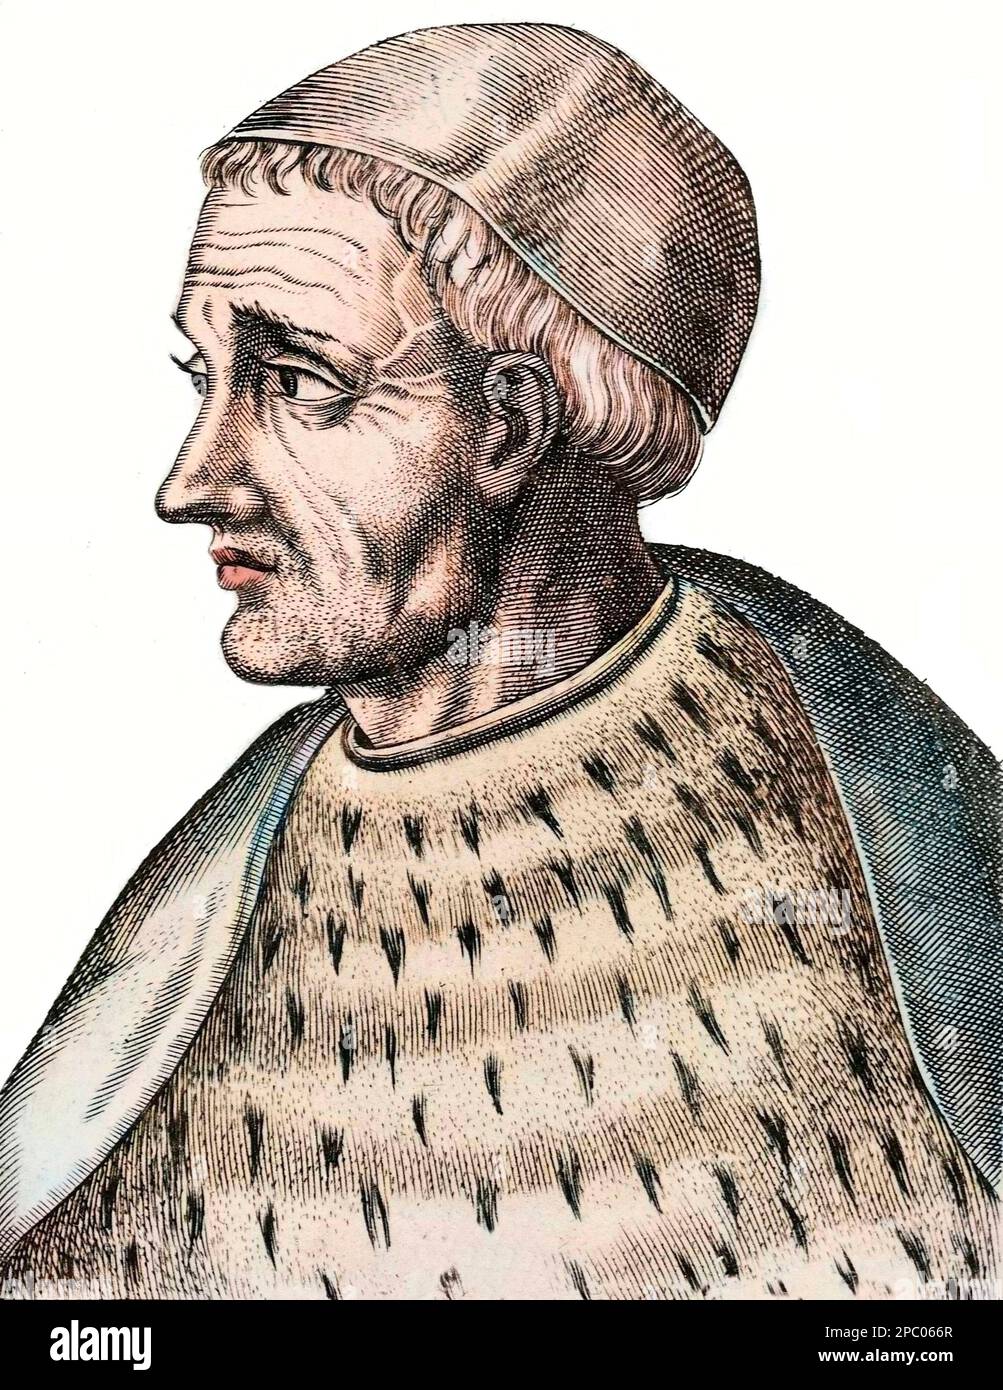 Portrait of Pierre d'Ailly (Petrus Aliacensis, Petrus de Alliaco) (1351-1420) French theologian, astrologer, and cardinal of the Roman Catholic Church Stock Photo